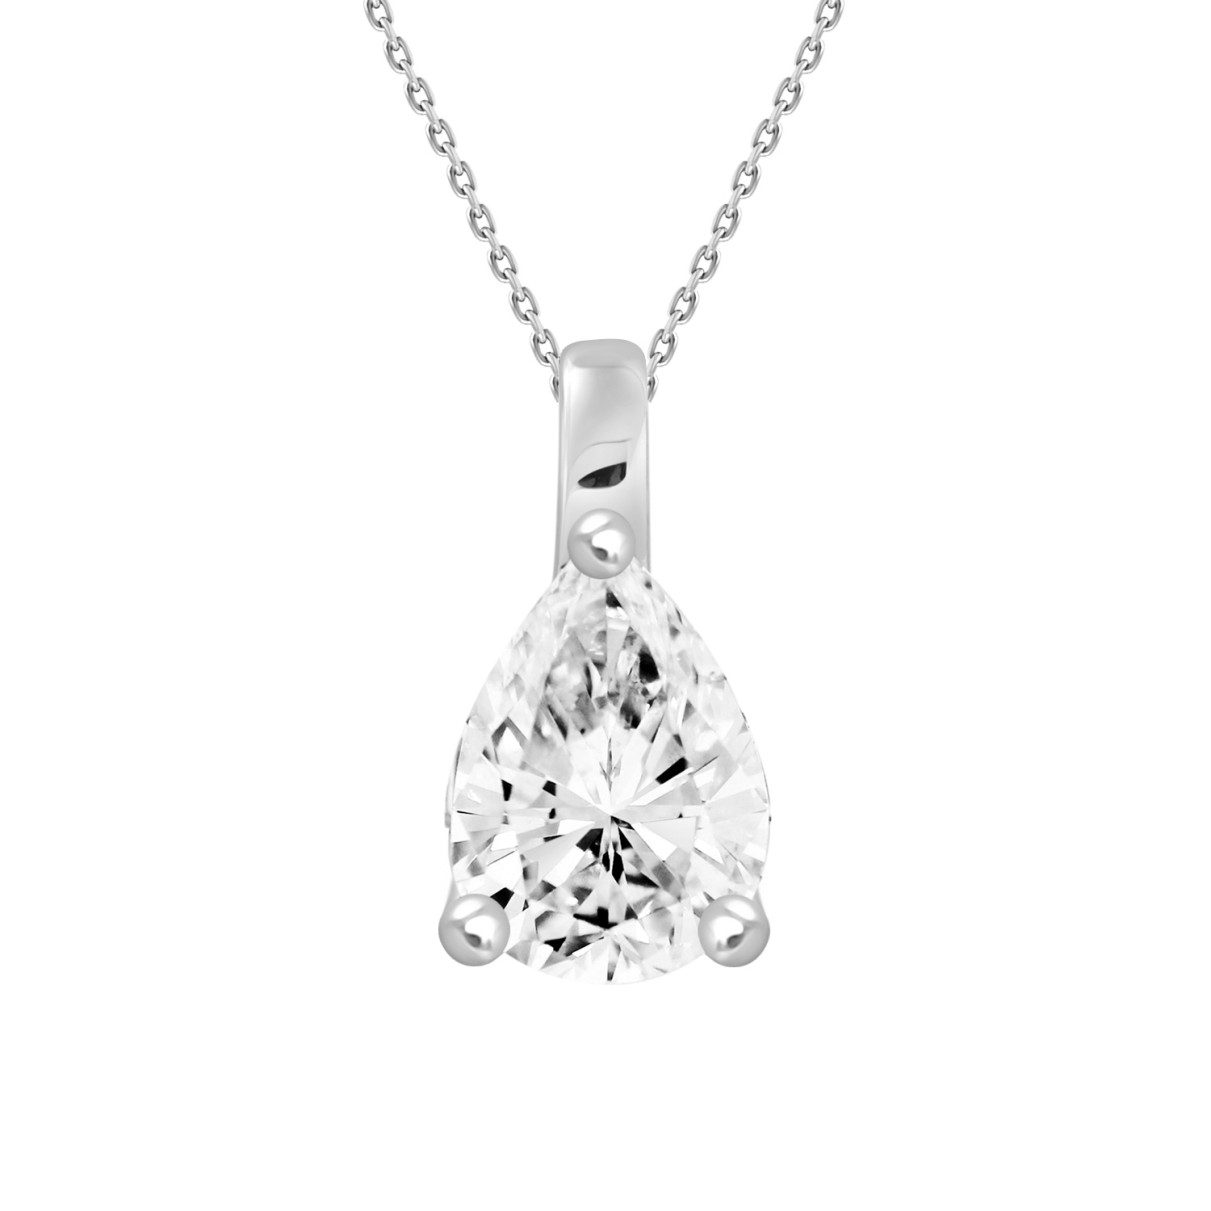 LADIES SOLITAIRE PENDANT WITH CHAIN 1 1/2CT PEAR DIAMOND 14K WHITE GOLD